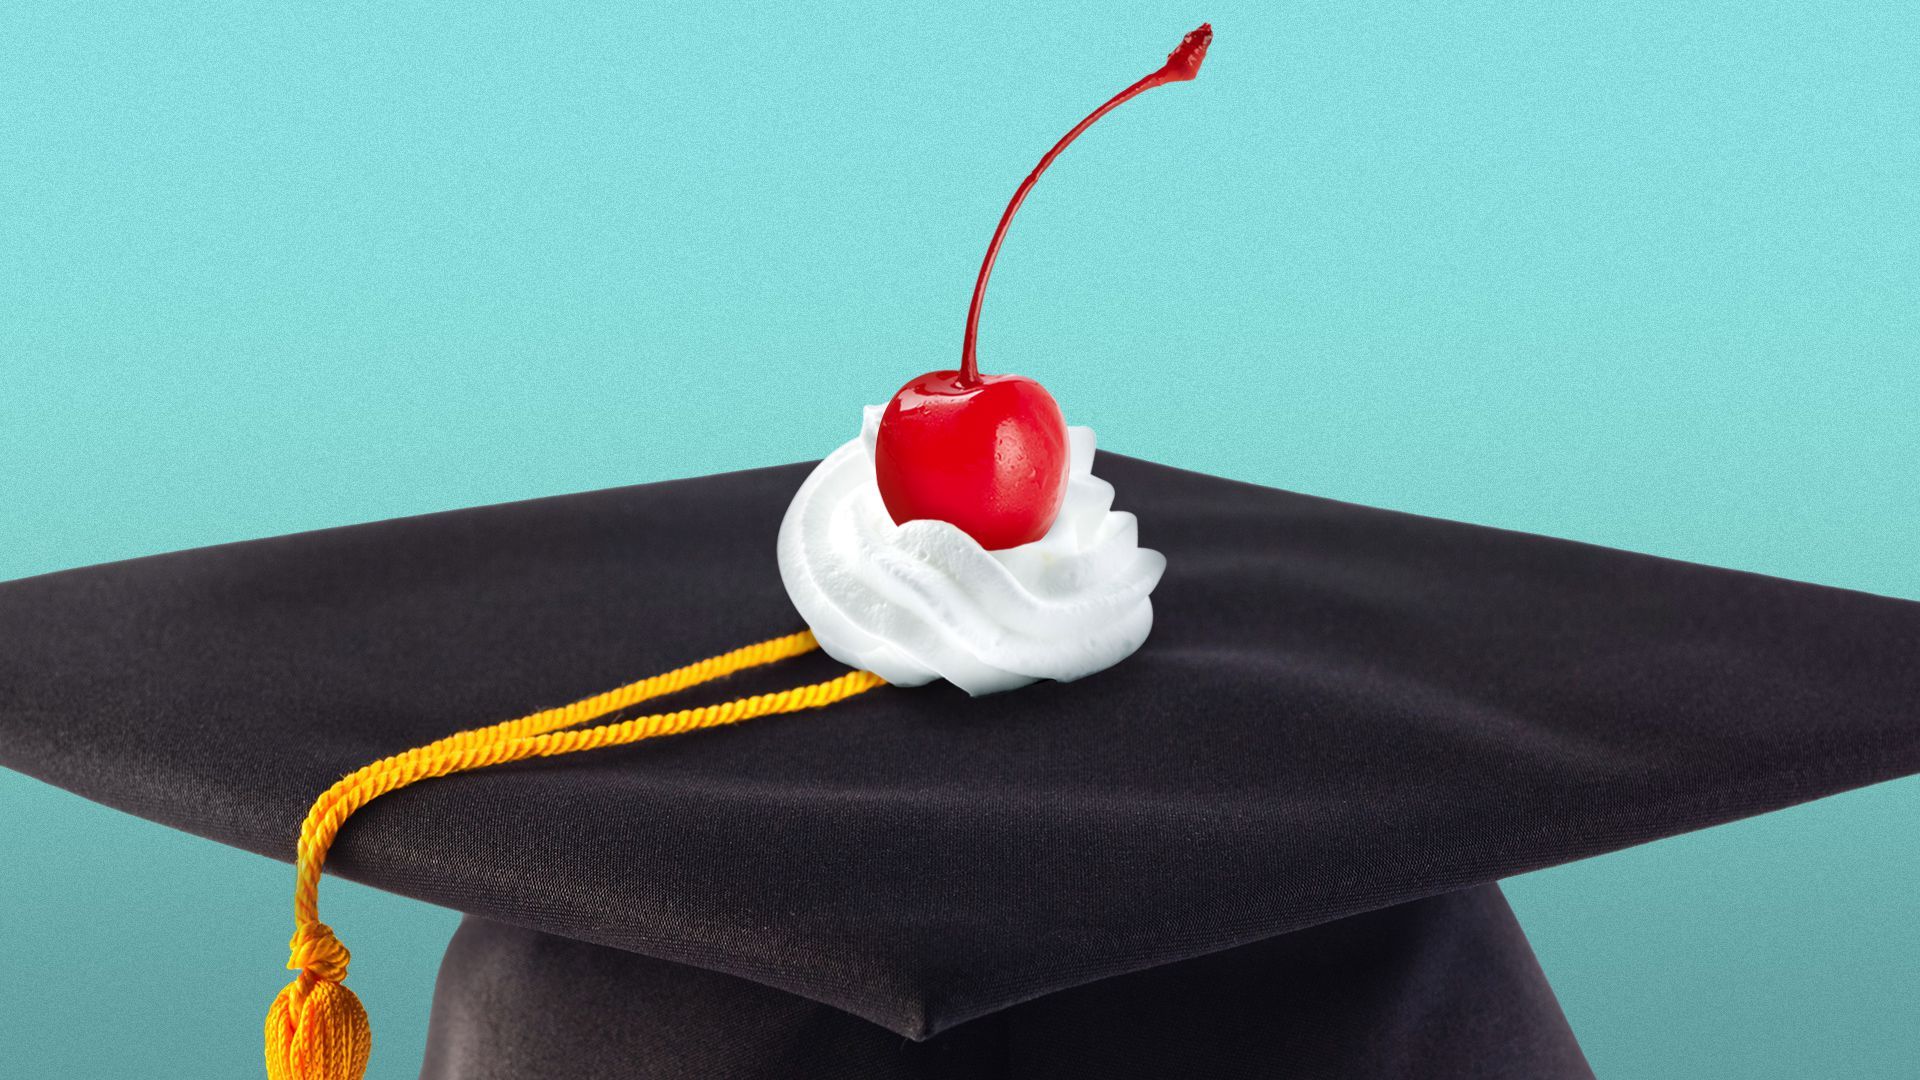 Illustration of a mortarboard with a cherry and whipped cream on top.